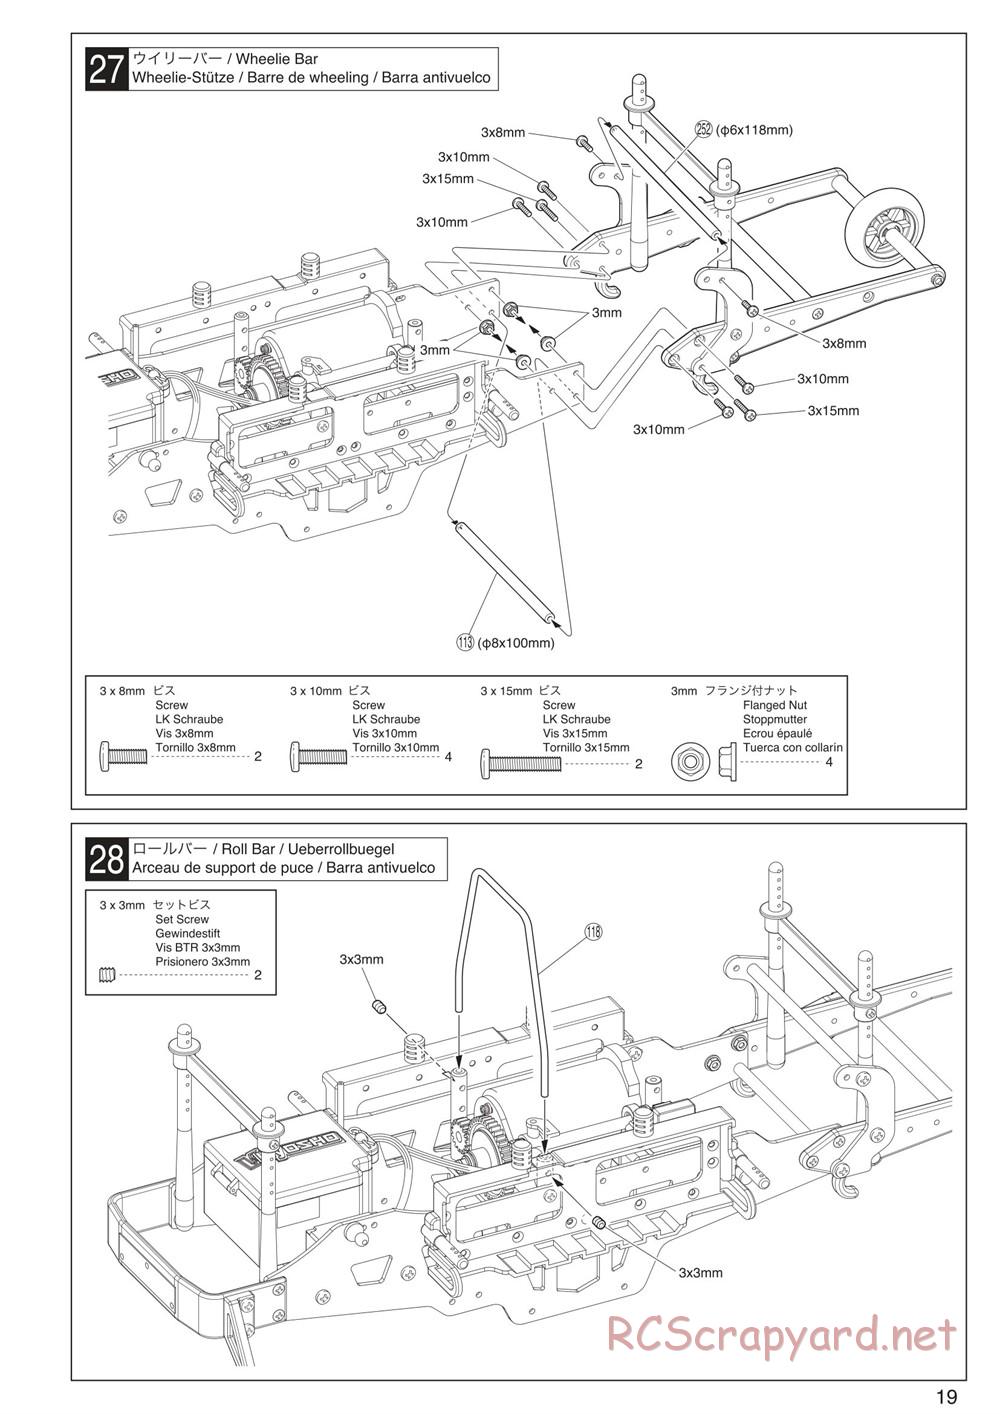 Kyosho - Mad Crusher VE - Manual - Page 19